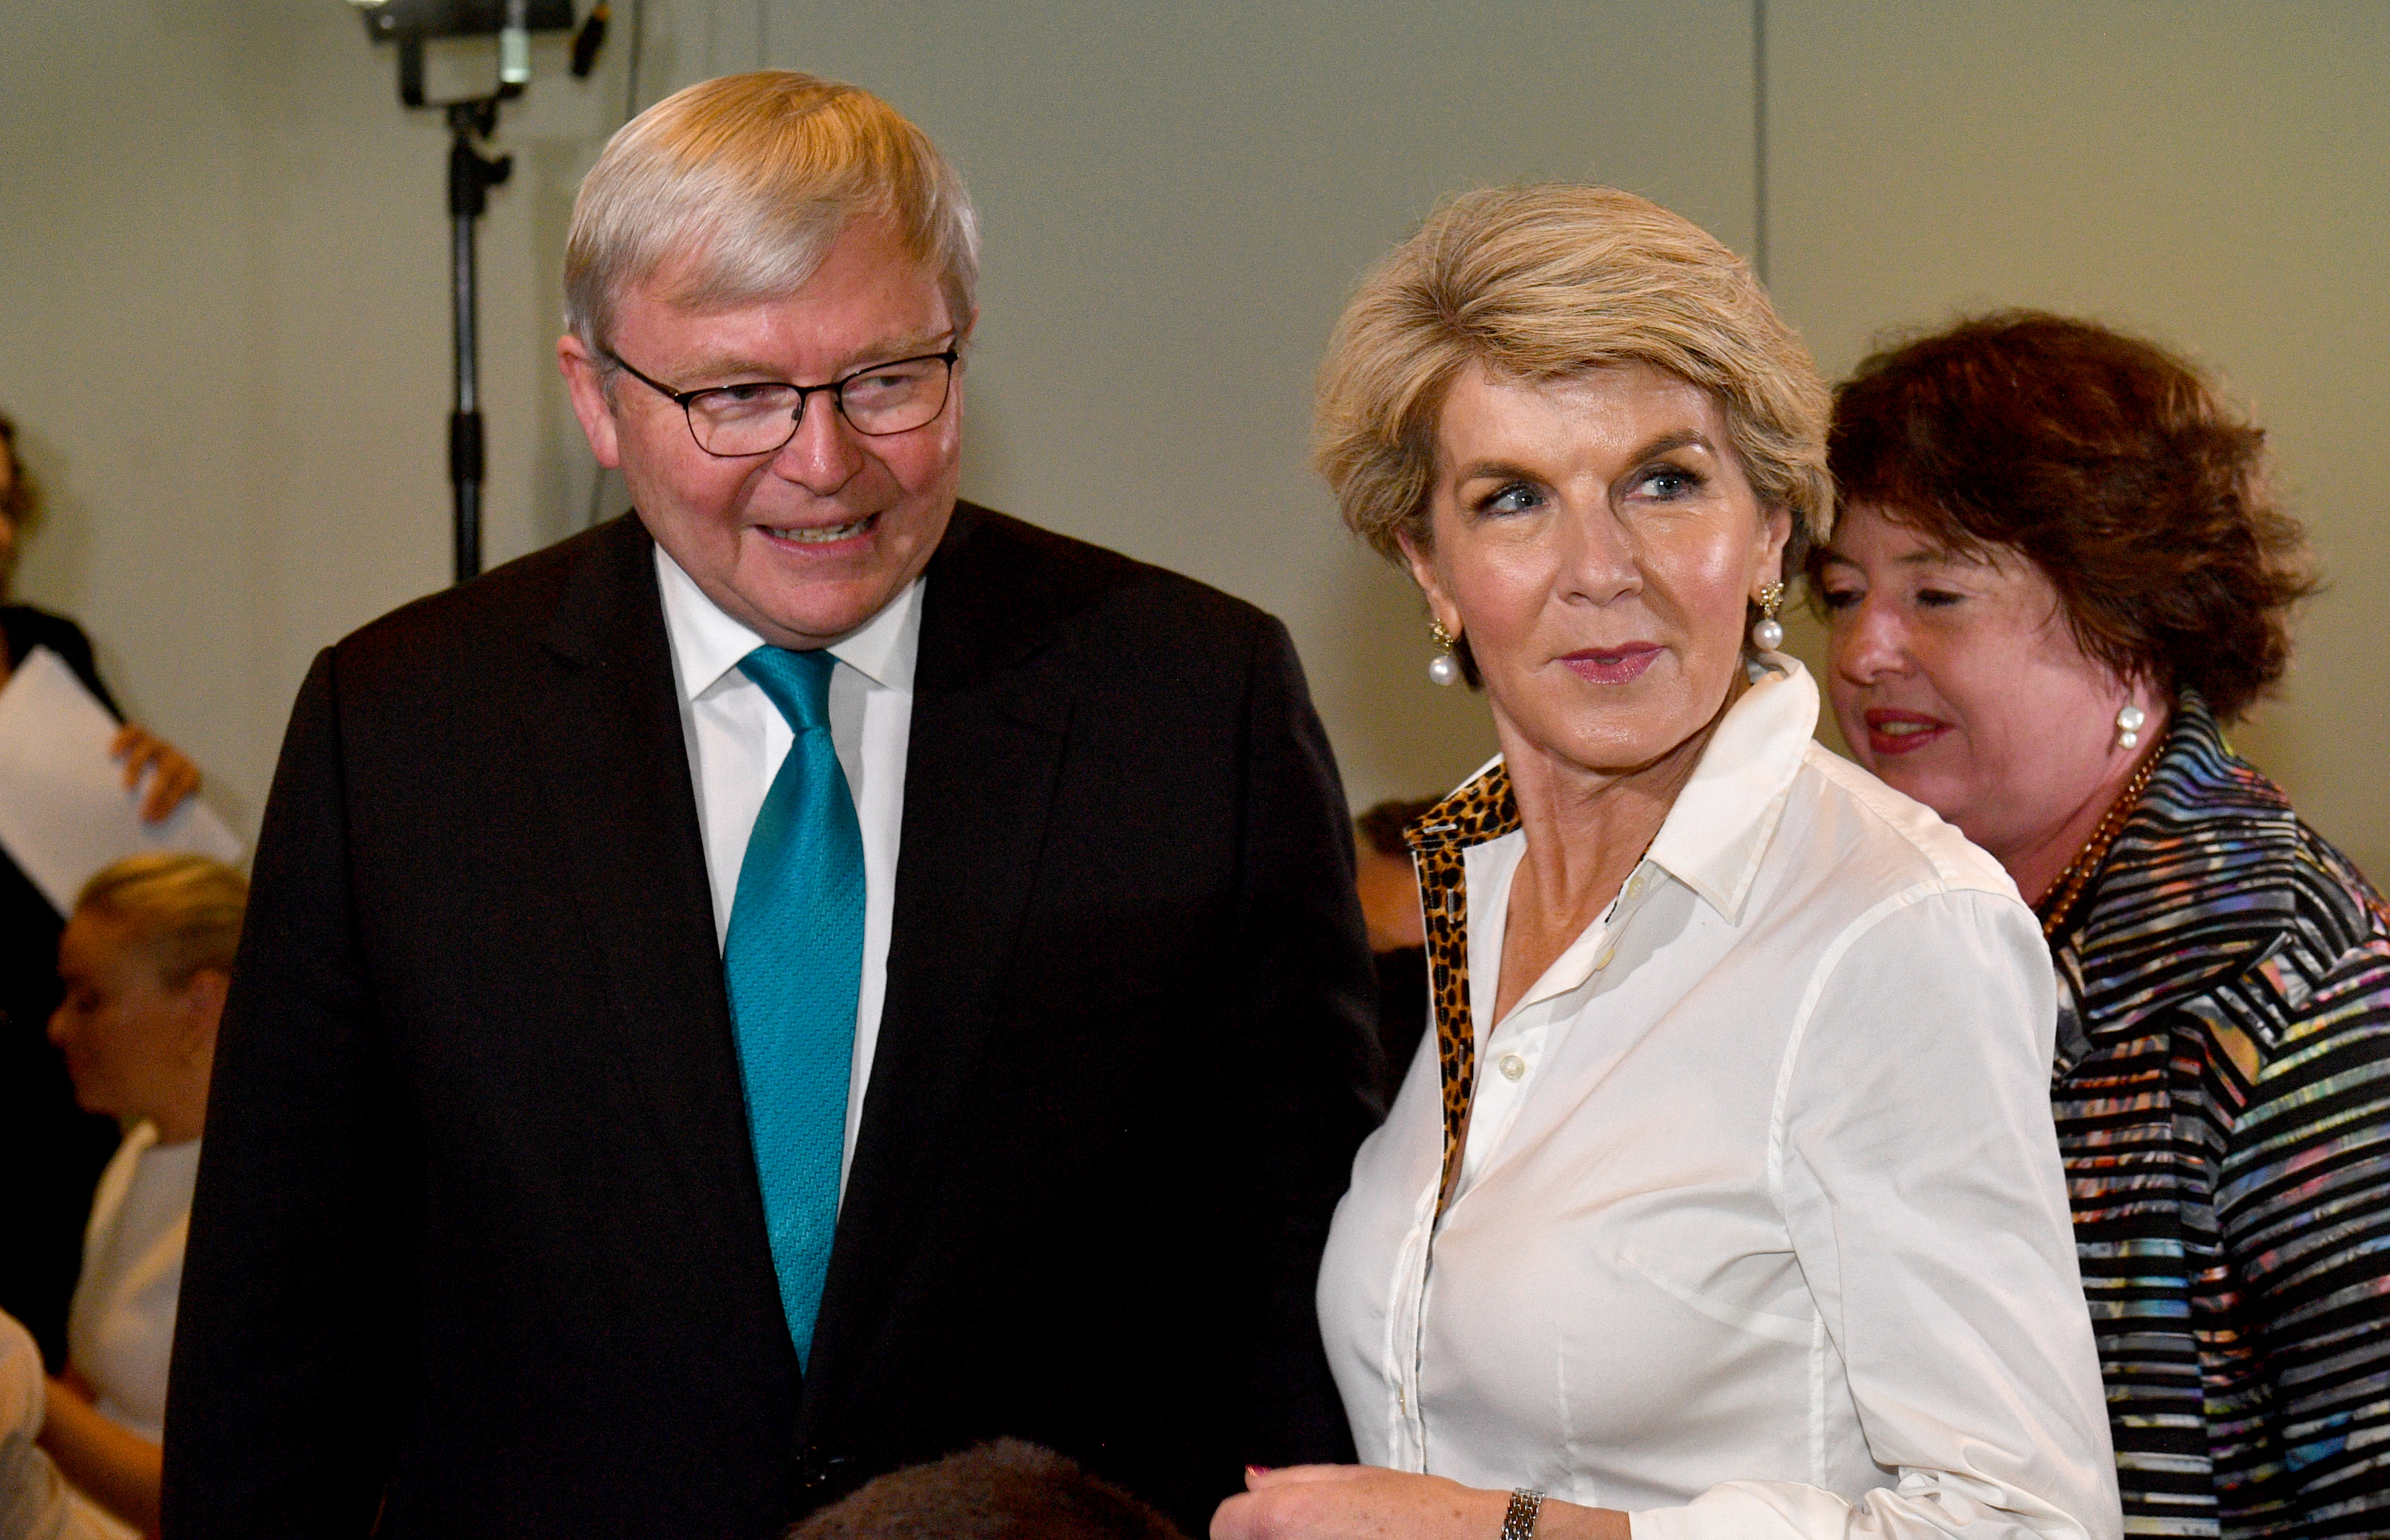 Julie Bishop's Jimmy Choo shoes gift sparks questions over